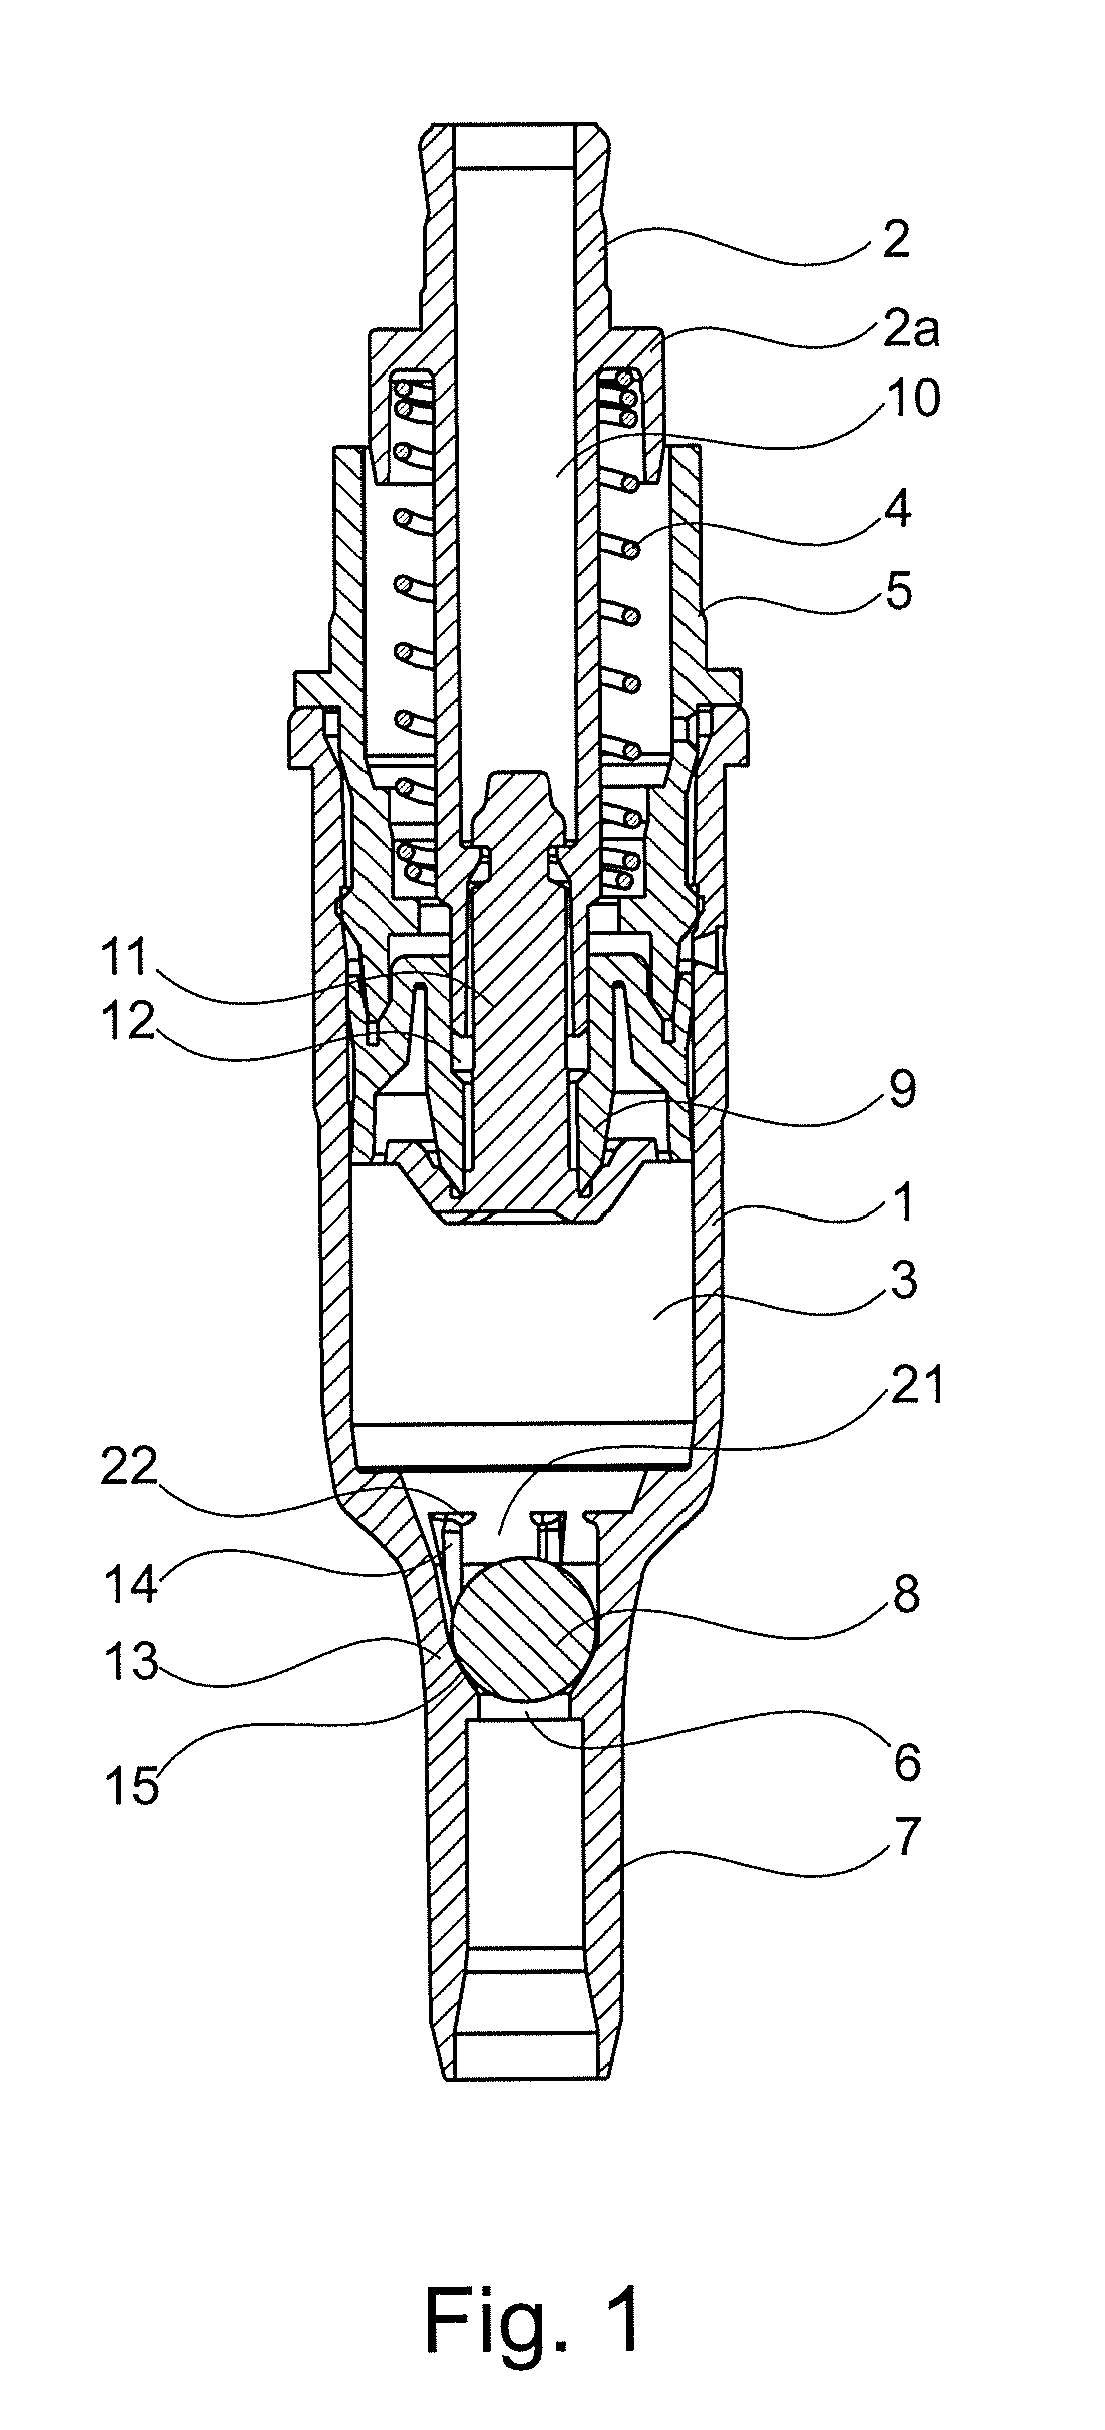 Method For Producing A Pump Body For The Dispensing Of A Fluid Product